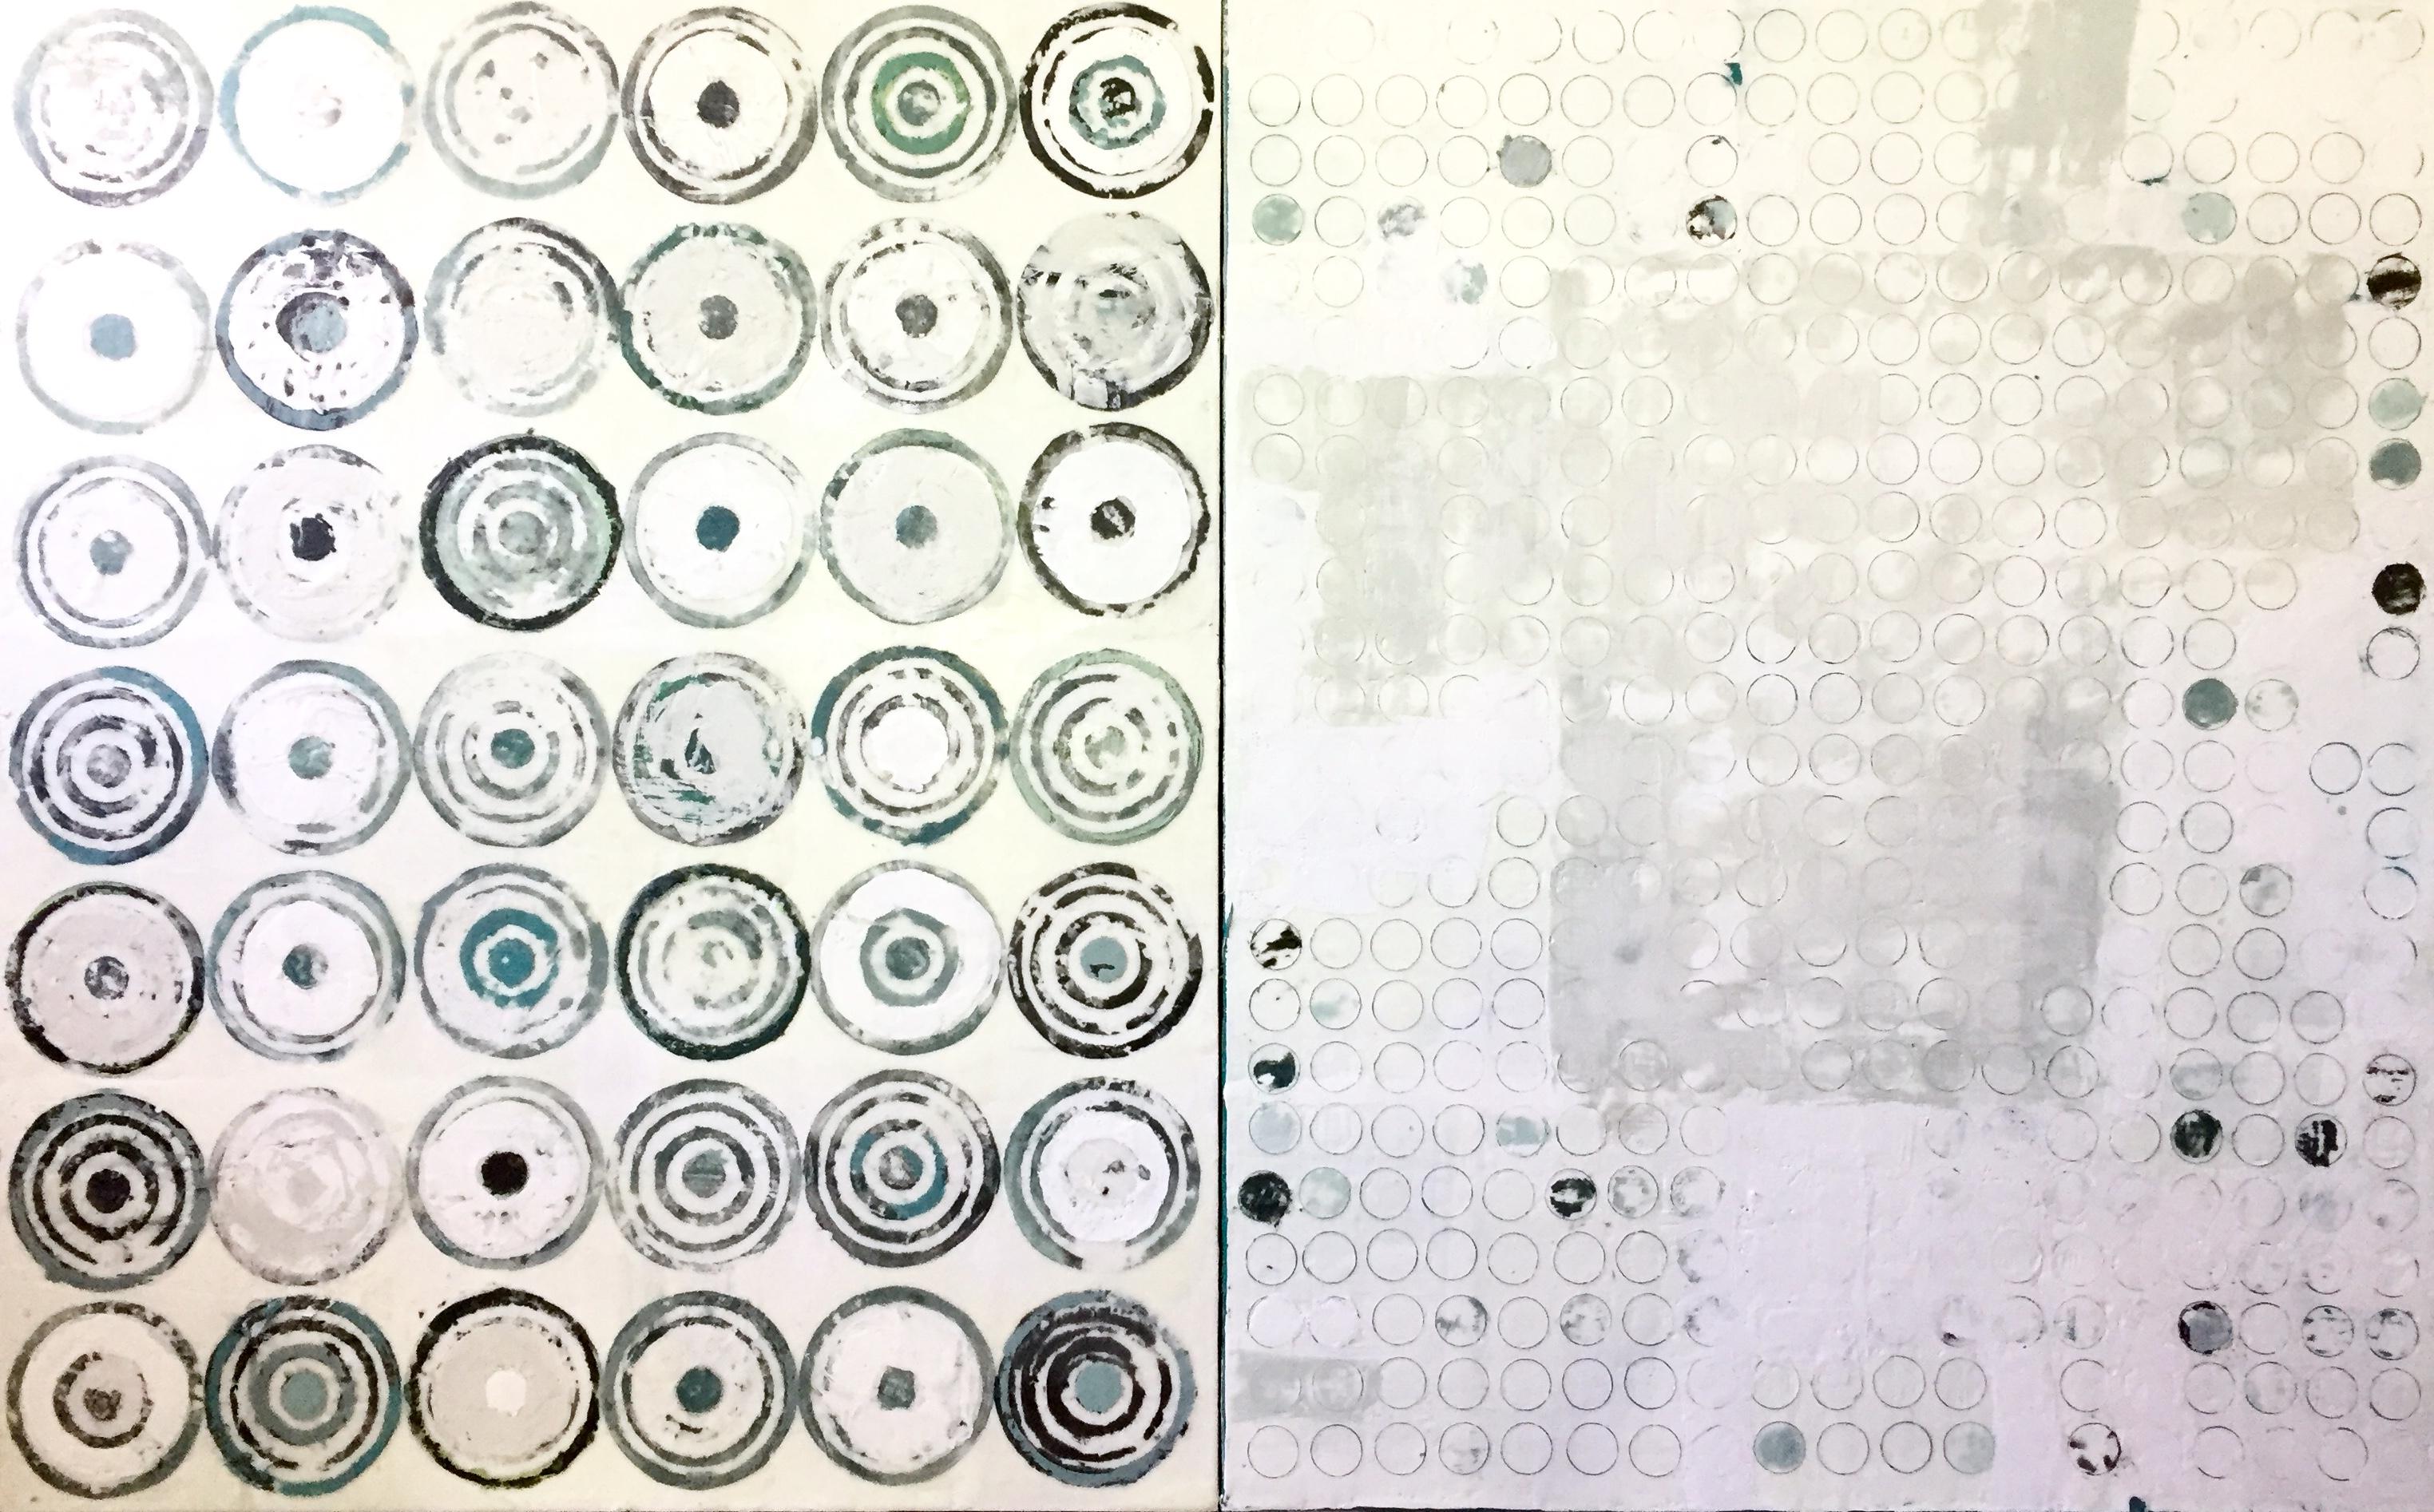 Marissa Voytenko Abstract Painting - "Around and Around We Go" White and Green Abstract Encaustic Diptych Painting